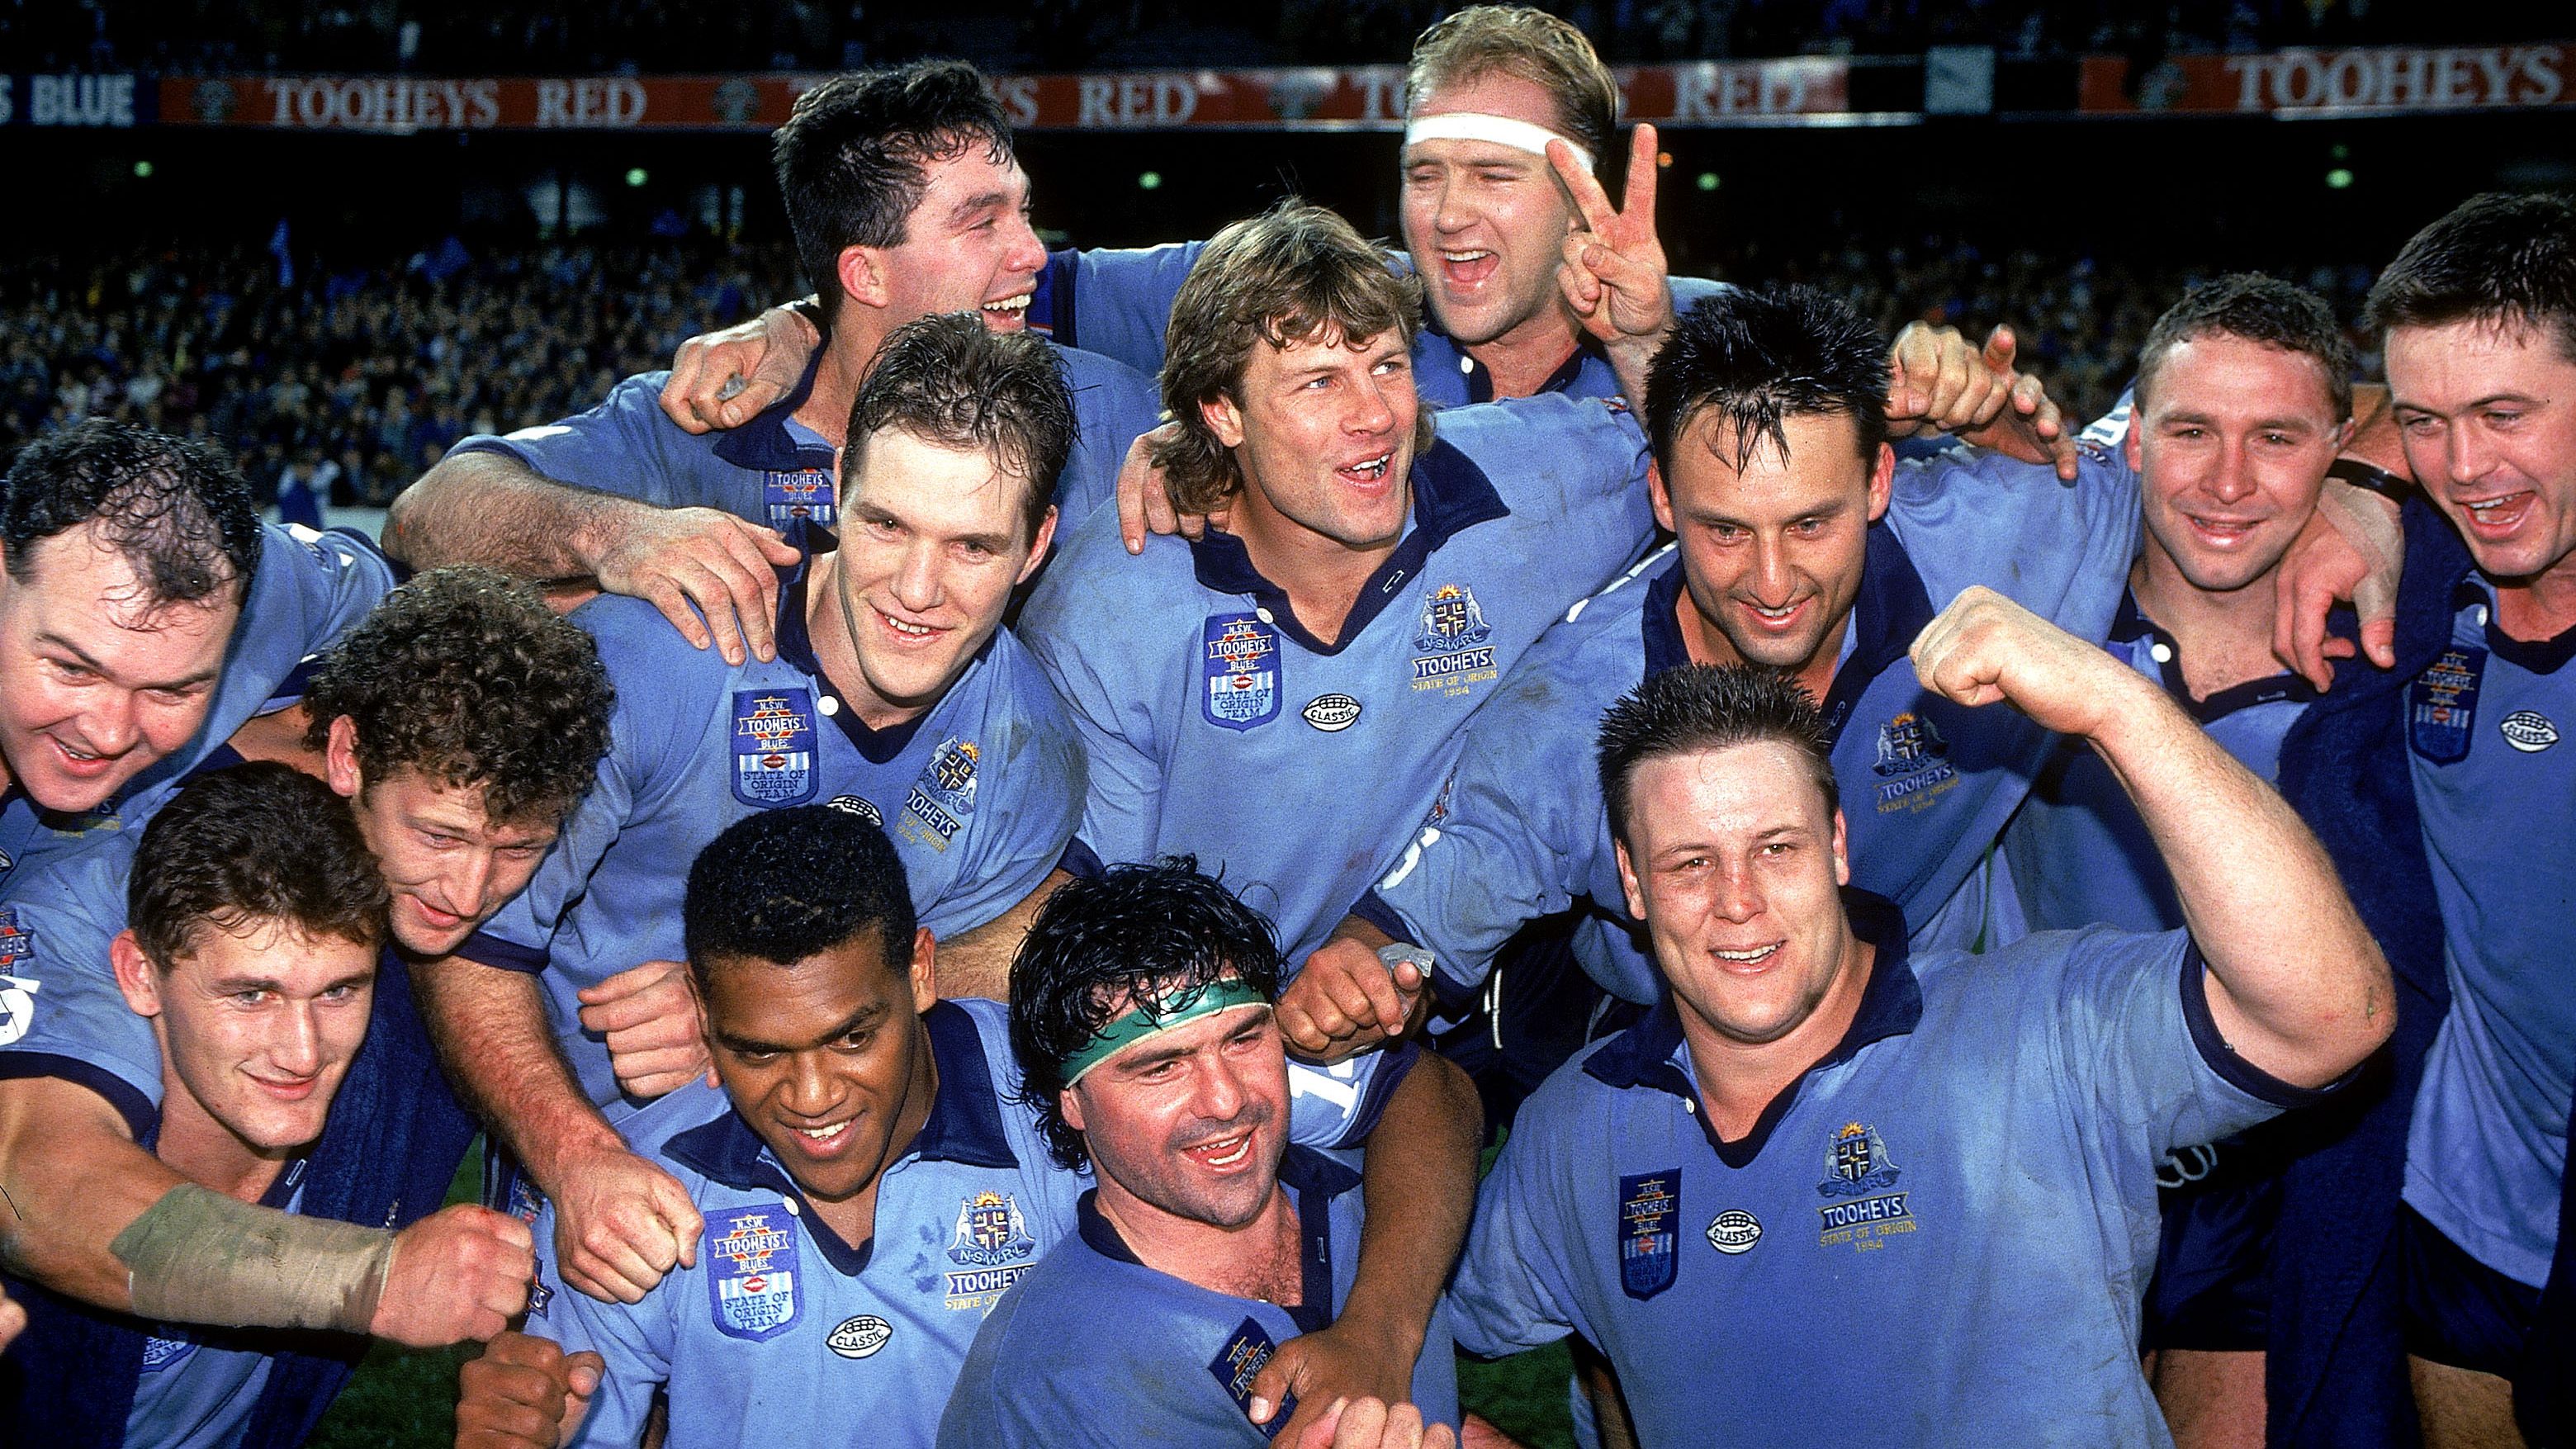 The Blues celebrate after winning game three and the 1994 Origin series 2-1 at Lang Park.